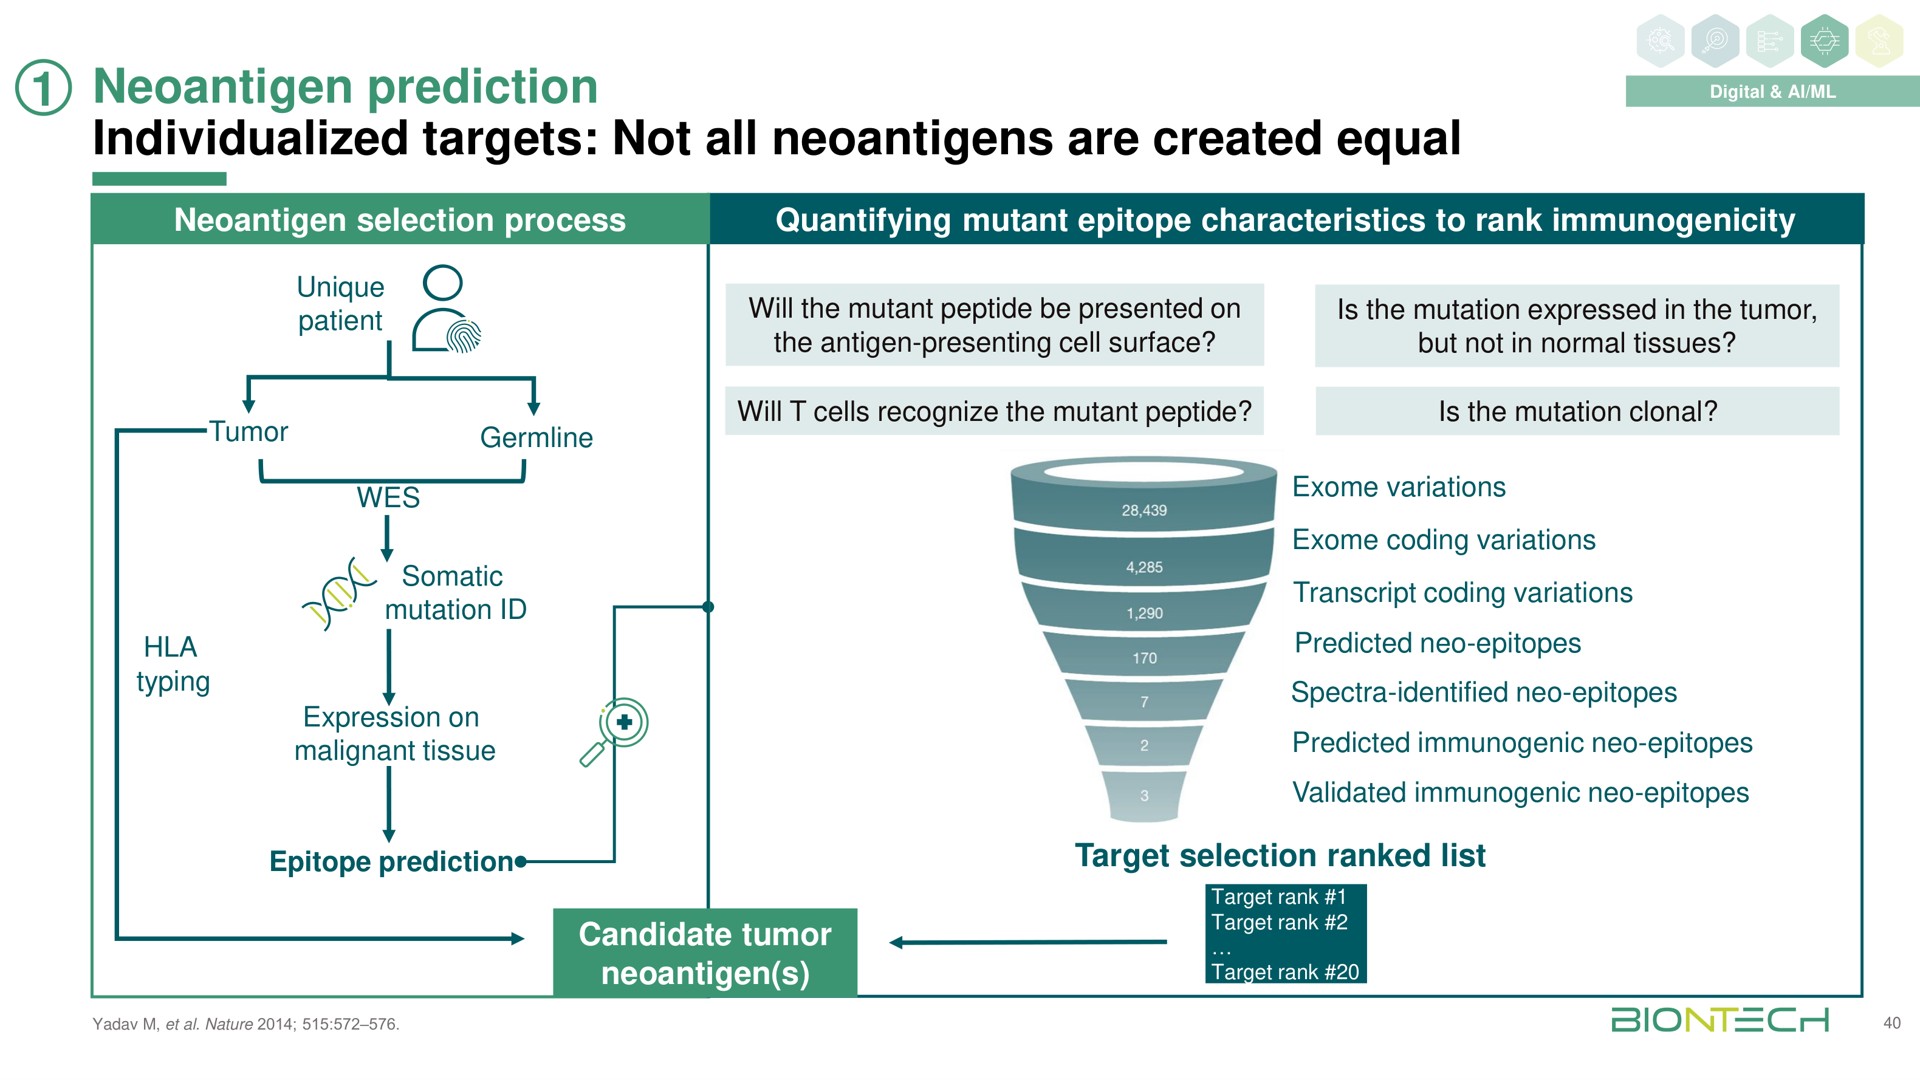 prediction individualized targets not all are created equal of | BioNTech